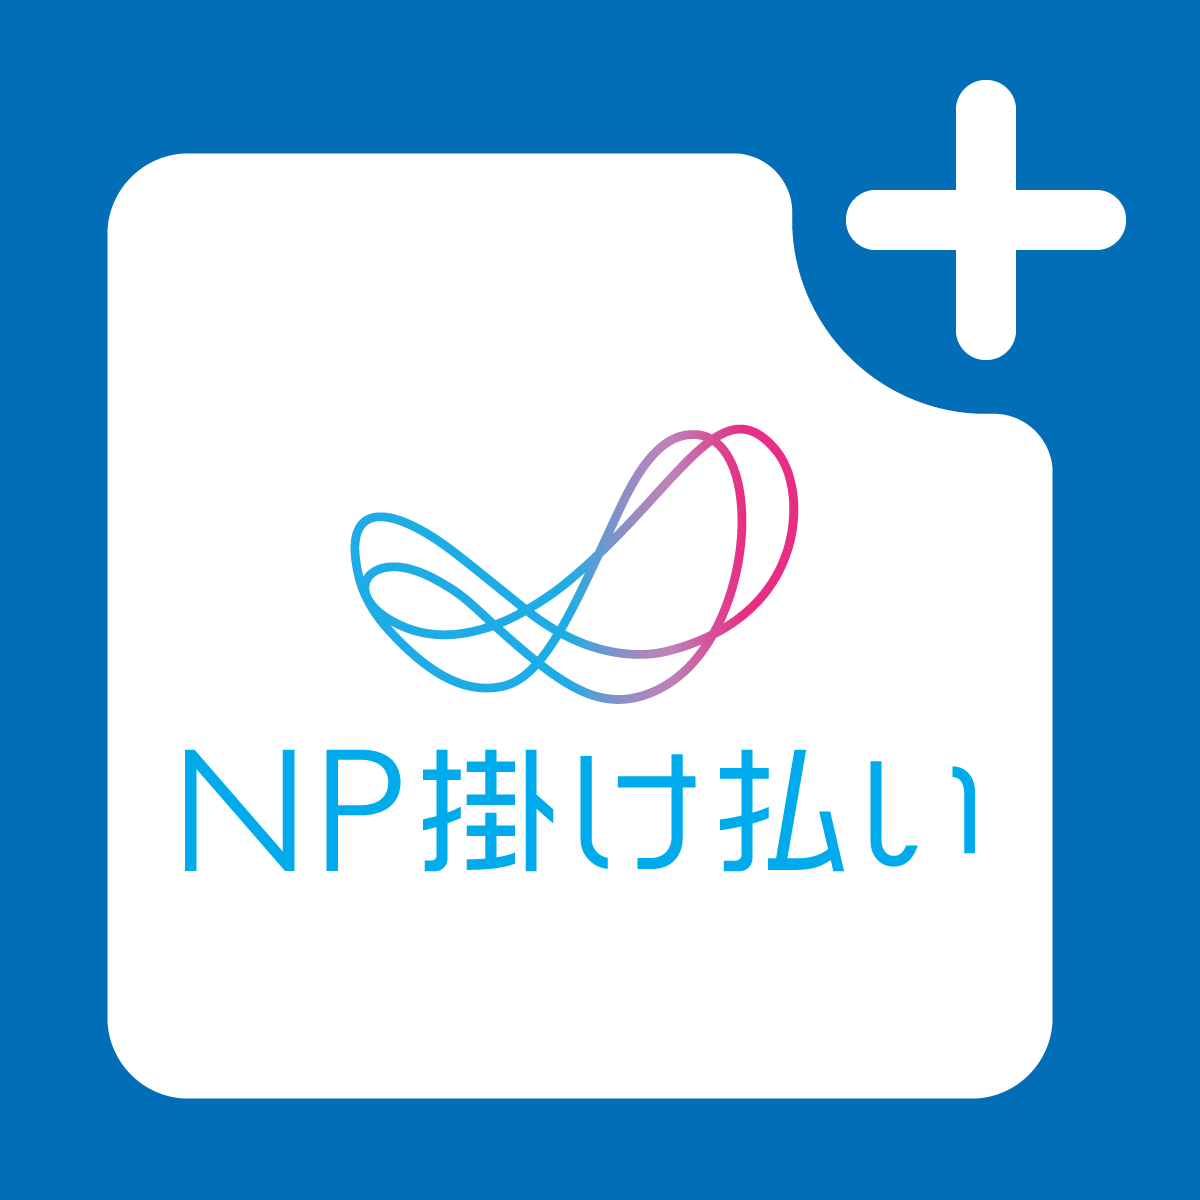 NP掛け払い 請求書発行依頼アプリ for Shopify